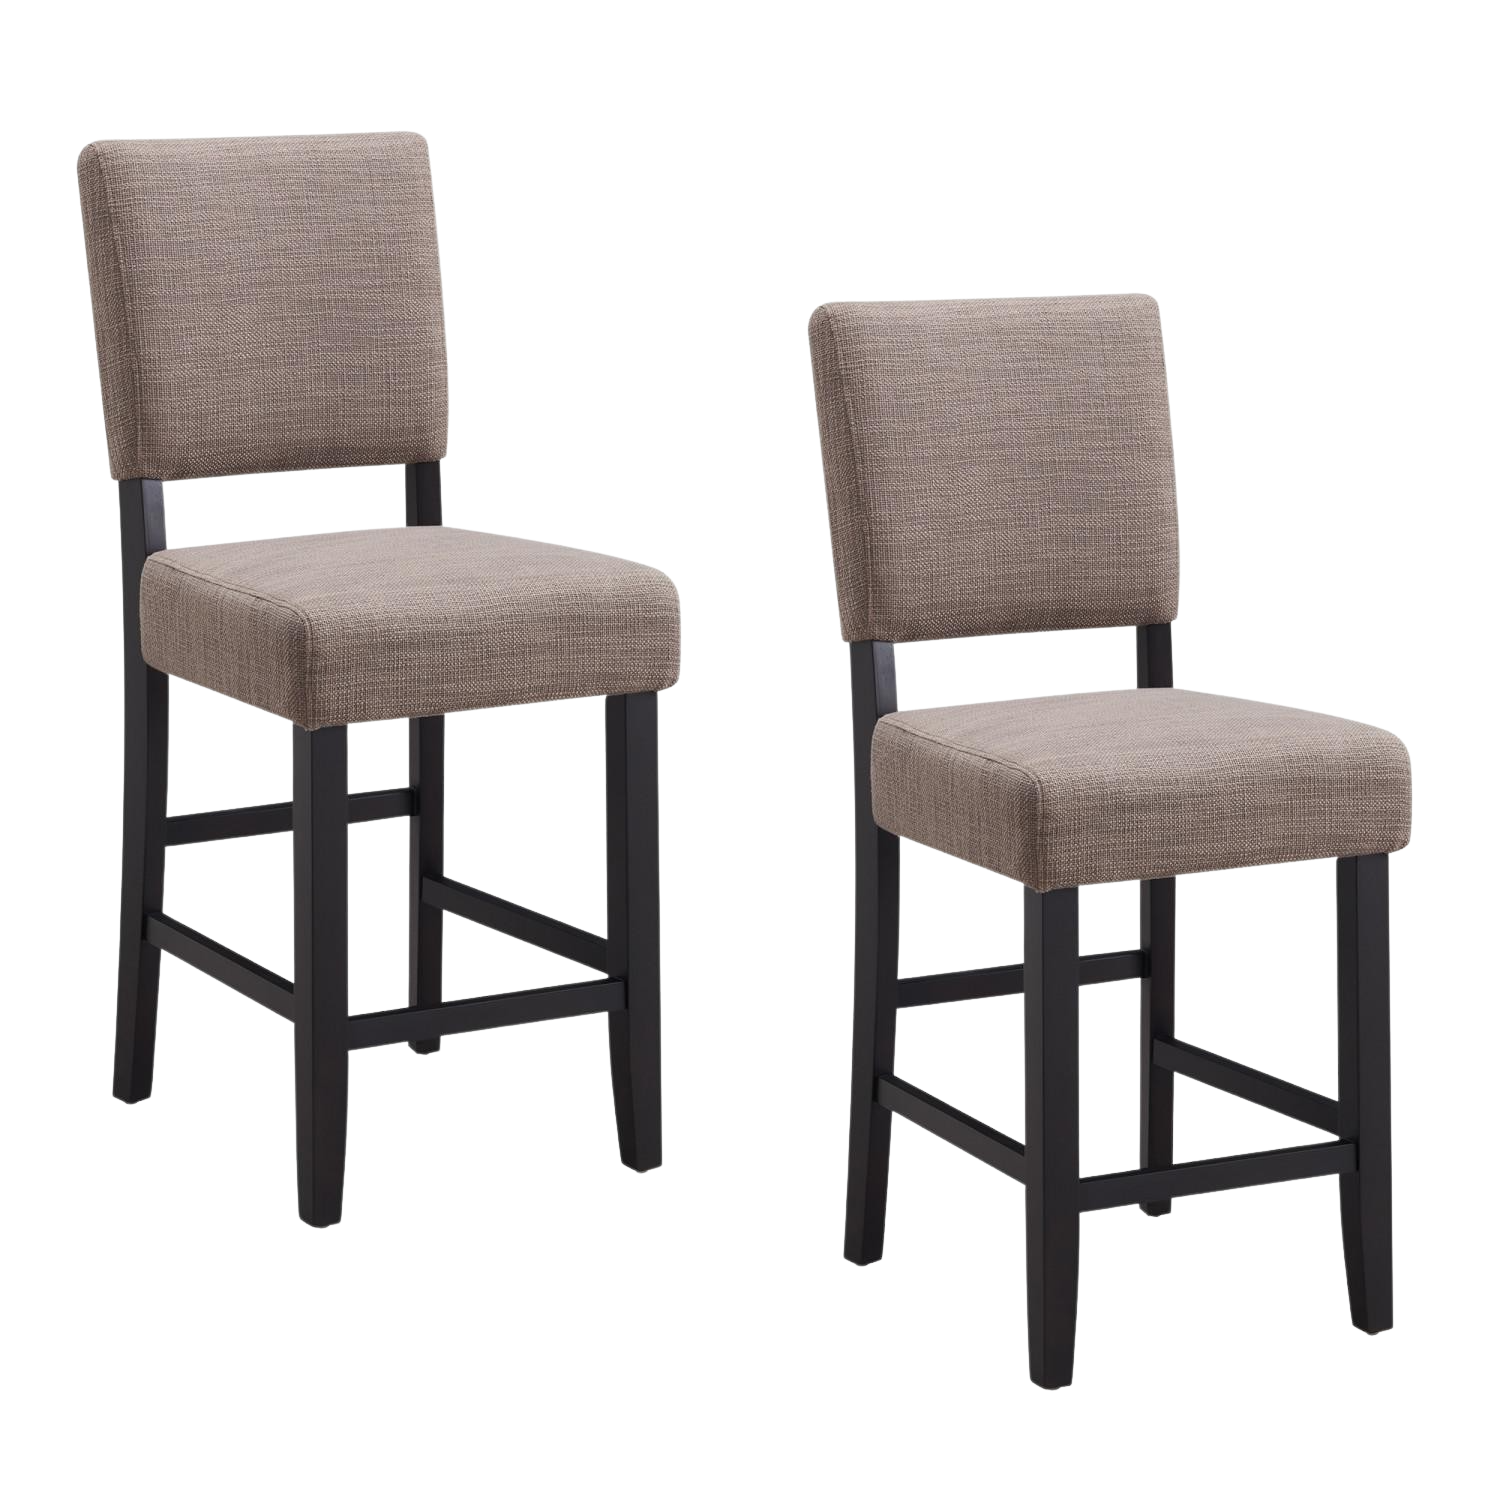 Leick Home 10086-BLKGL Counter Stool in Black and Gray Set of 2 New